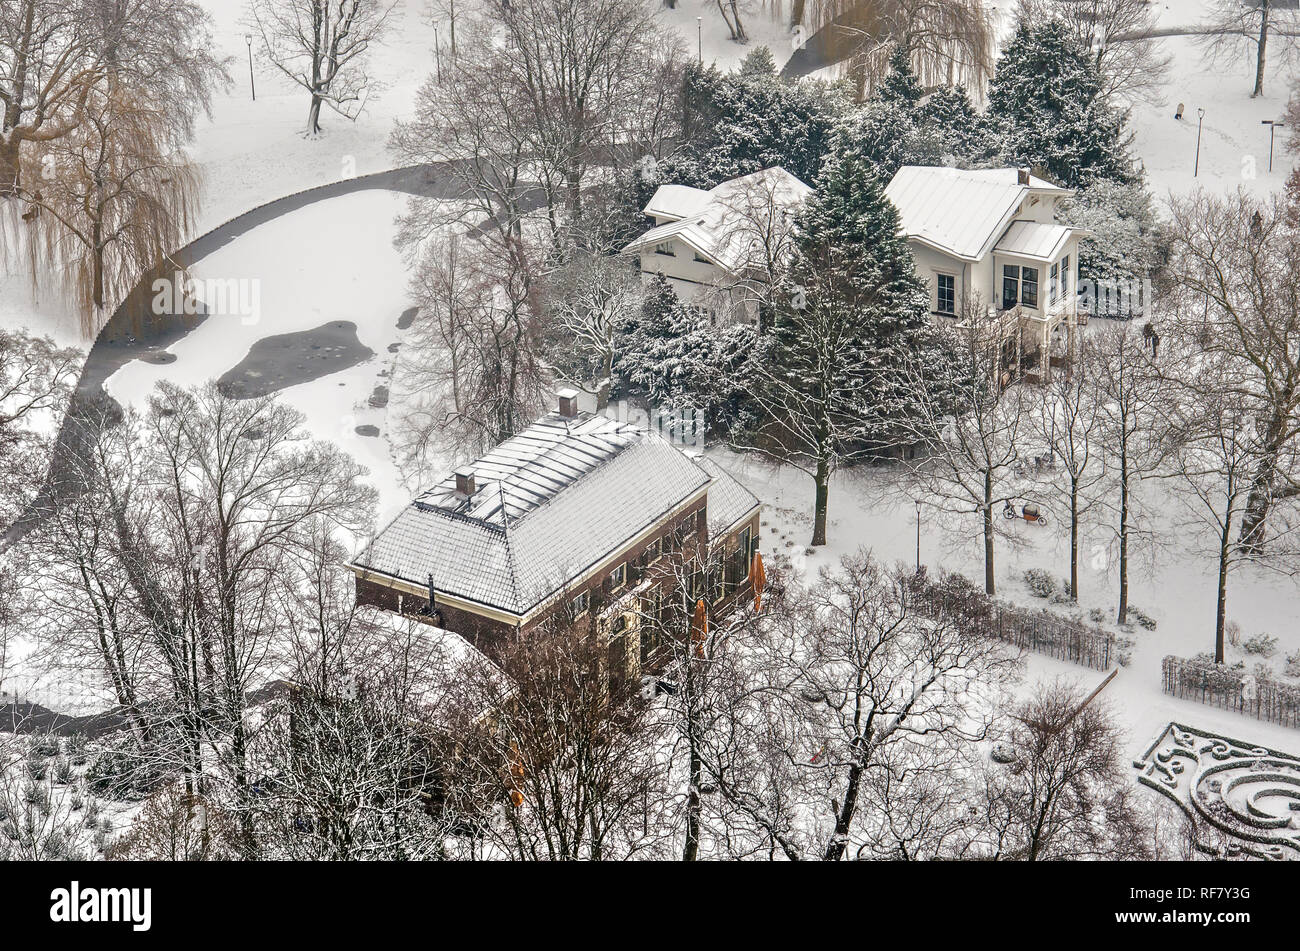 Rotterdam, January 22, 2019: aerial view of a part of the Park in winter, with the former Mansion and Coach House, now restaurants/cafes Stock Photo